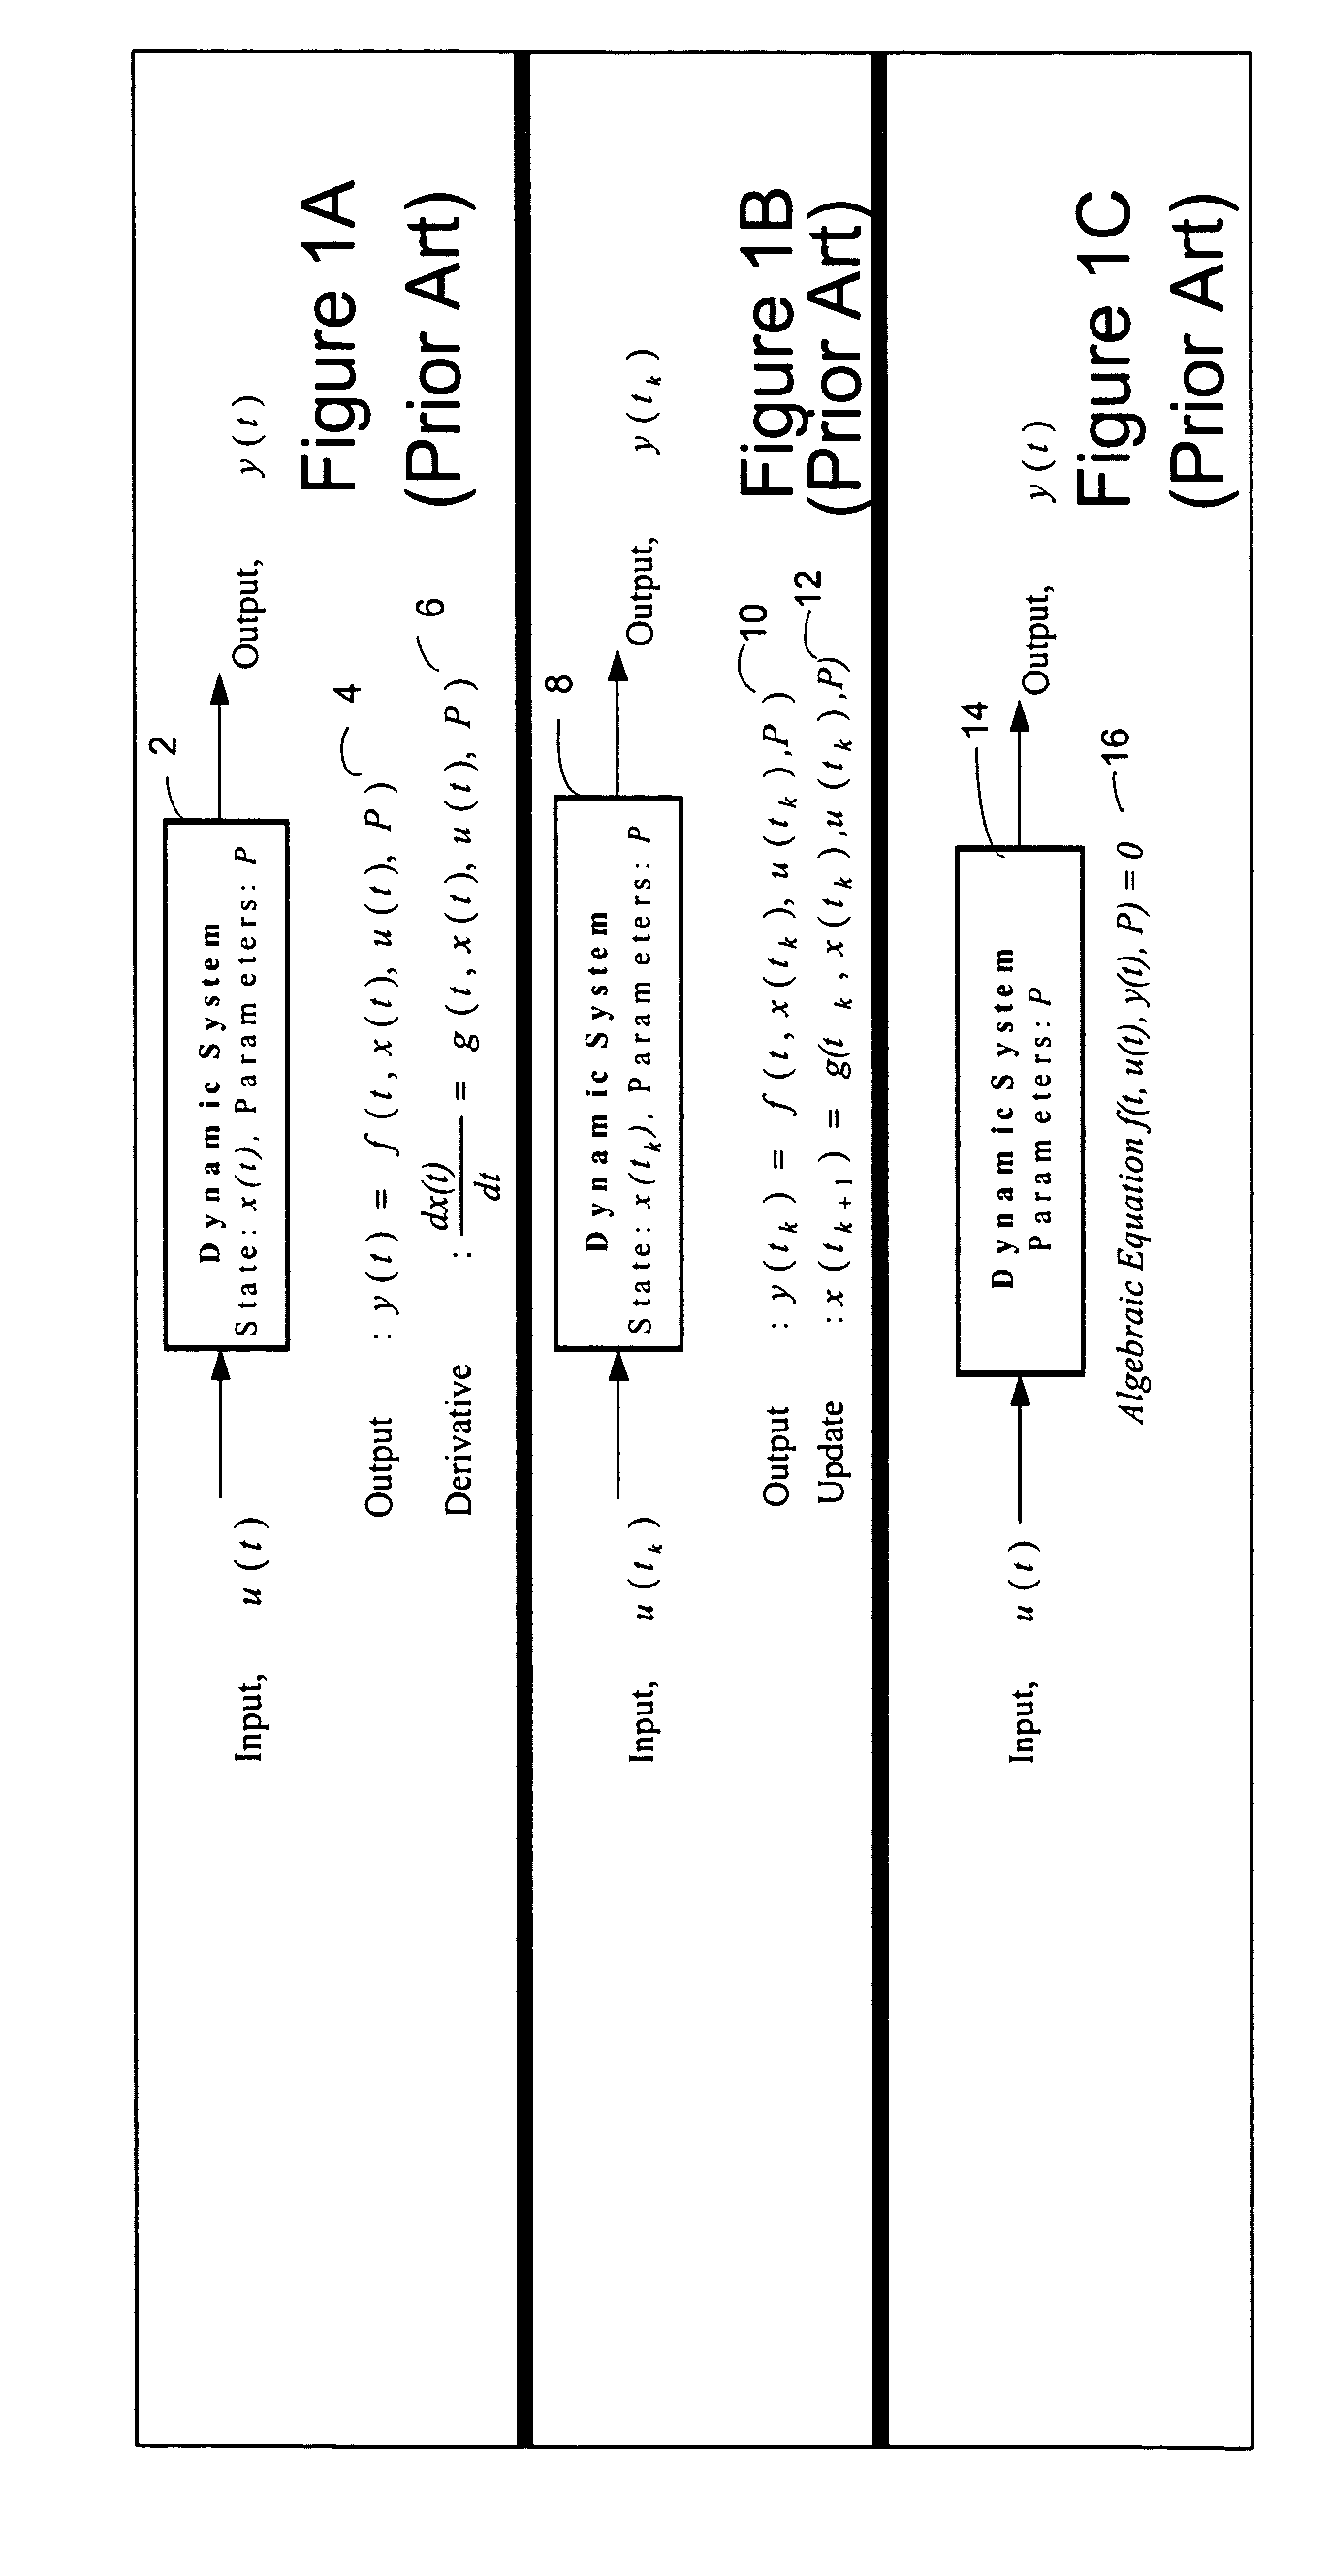 System and method for using execution contexts in block diagram modeling